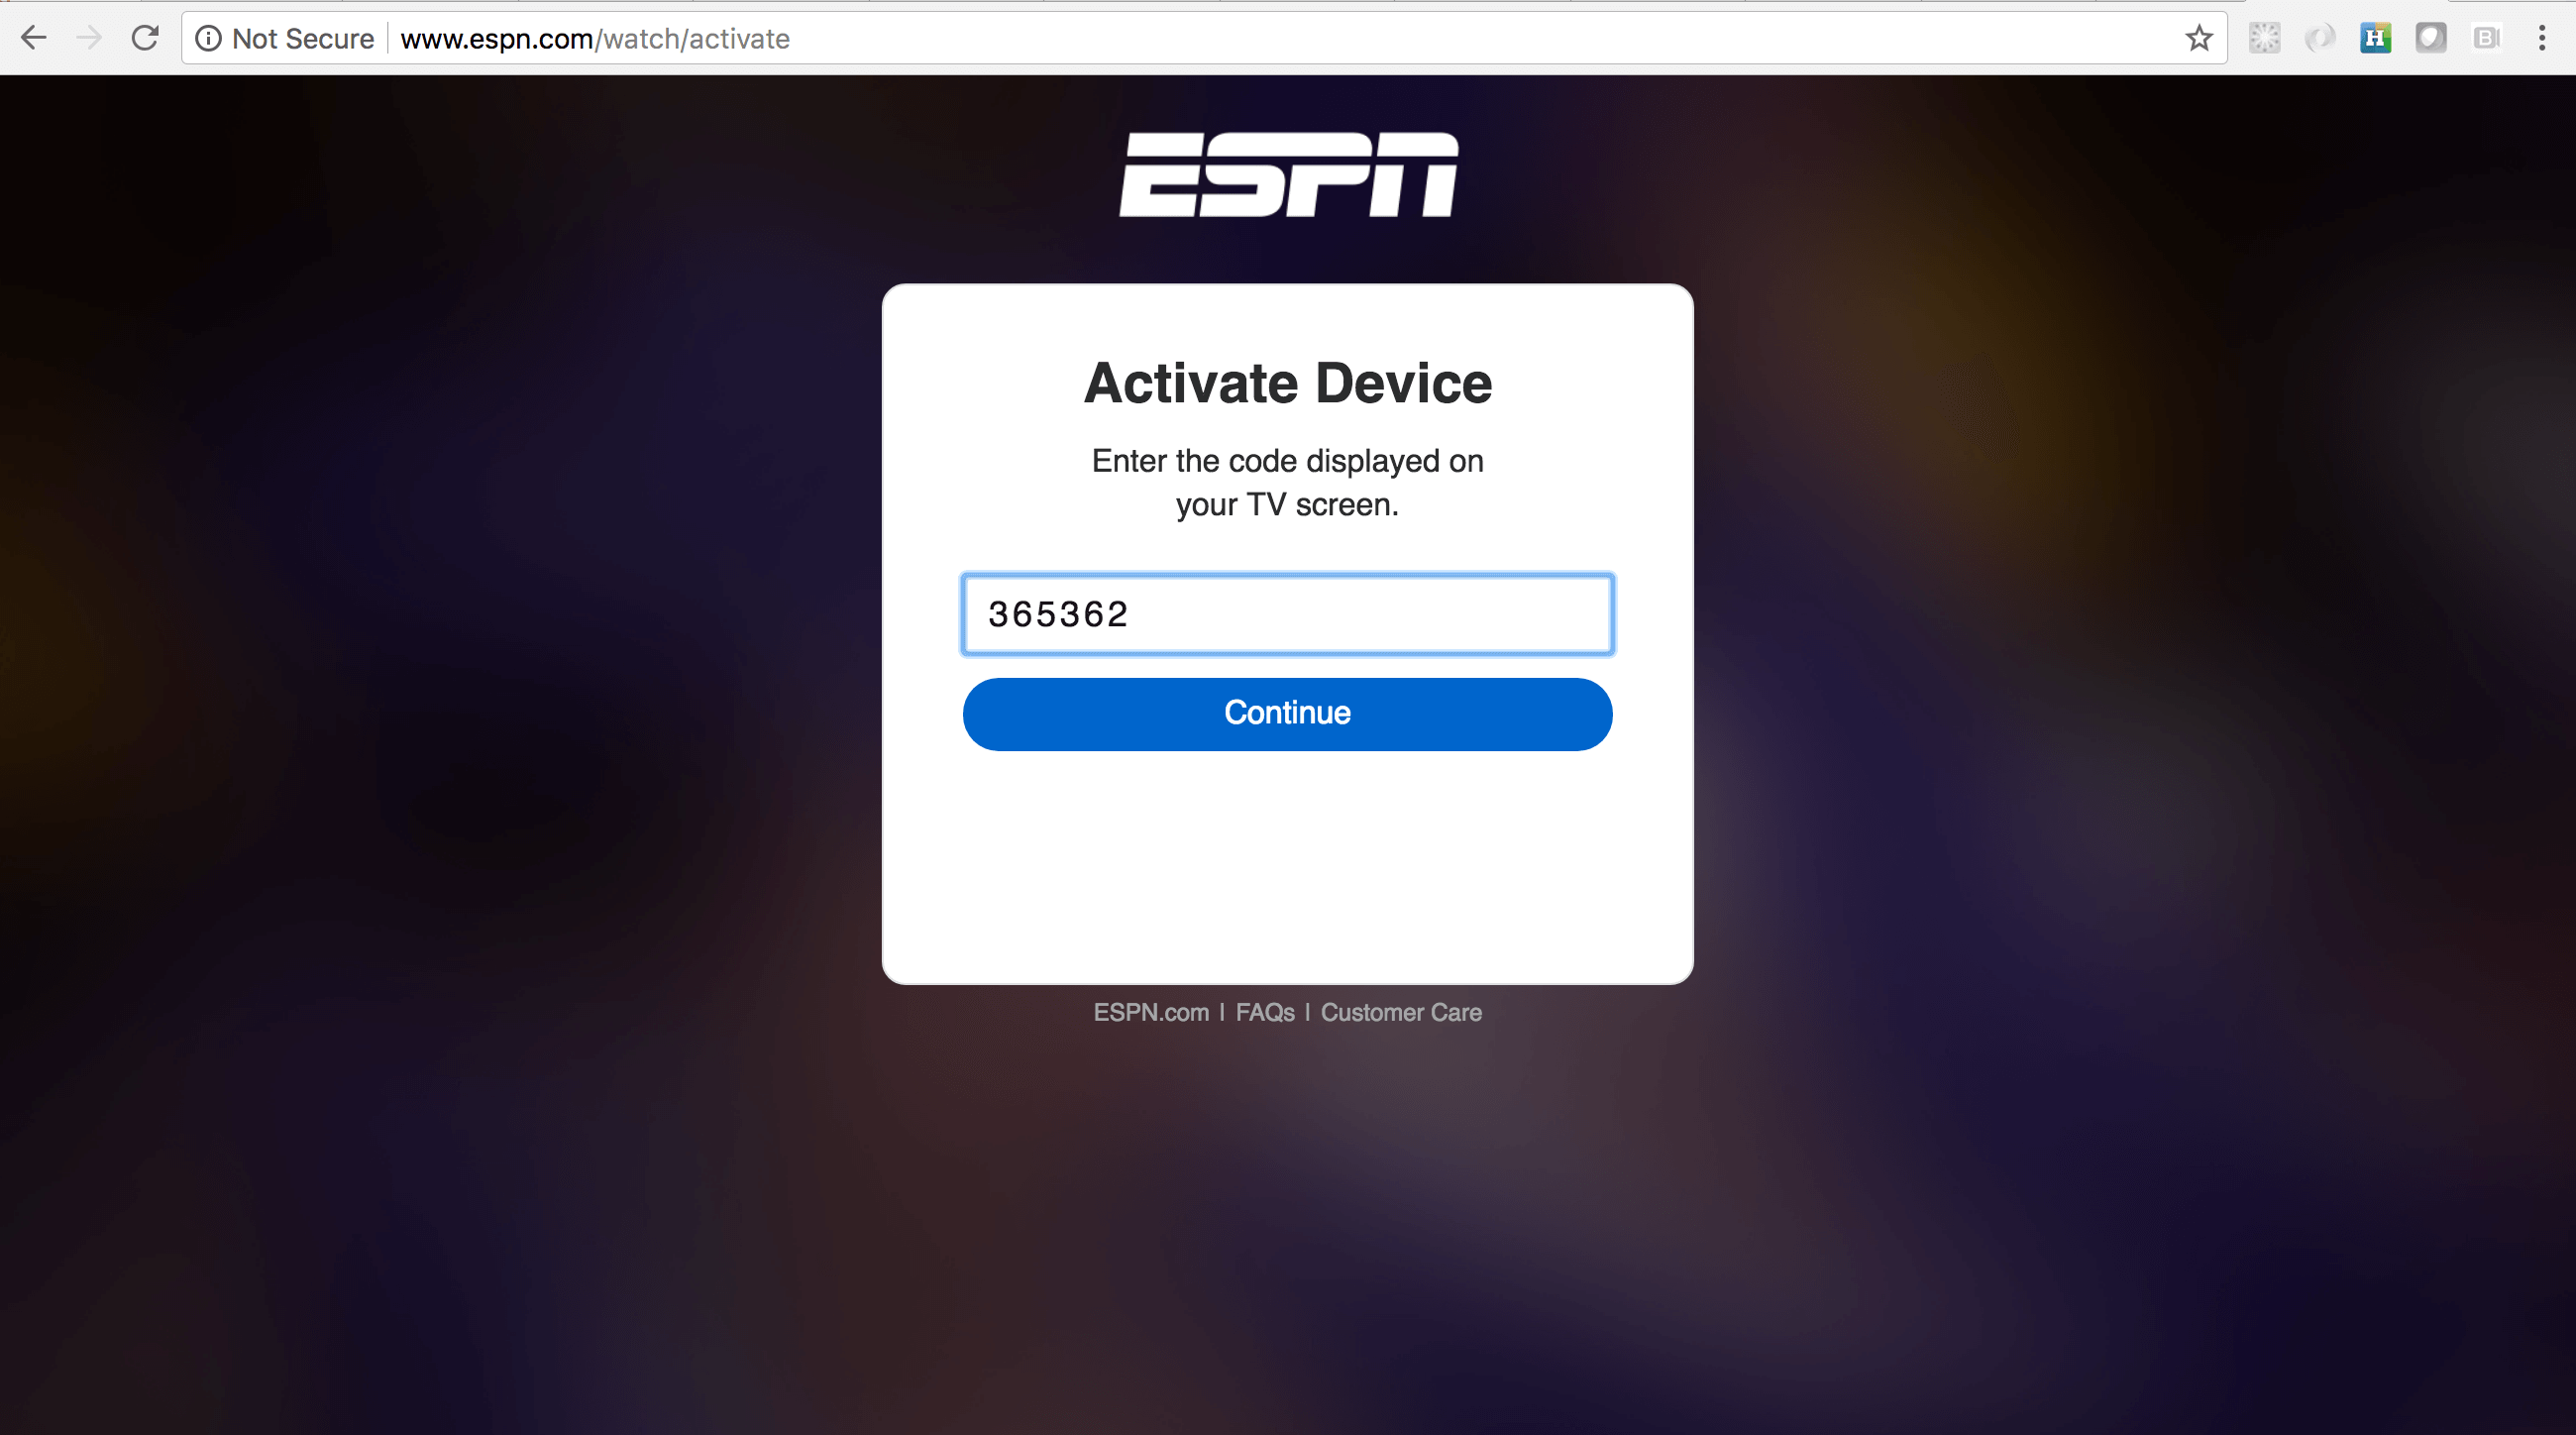 what should I do with the espn eom activation code